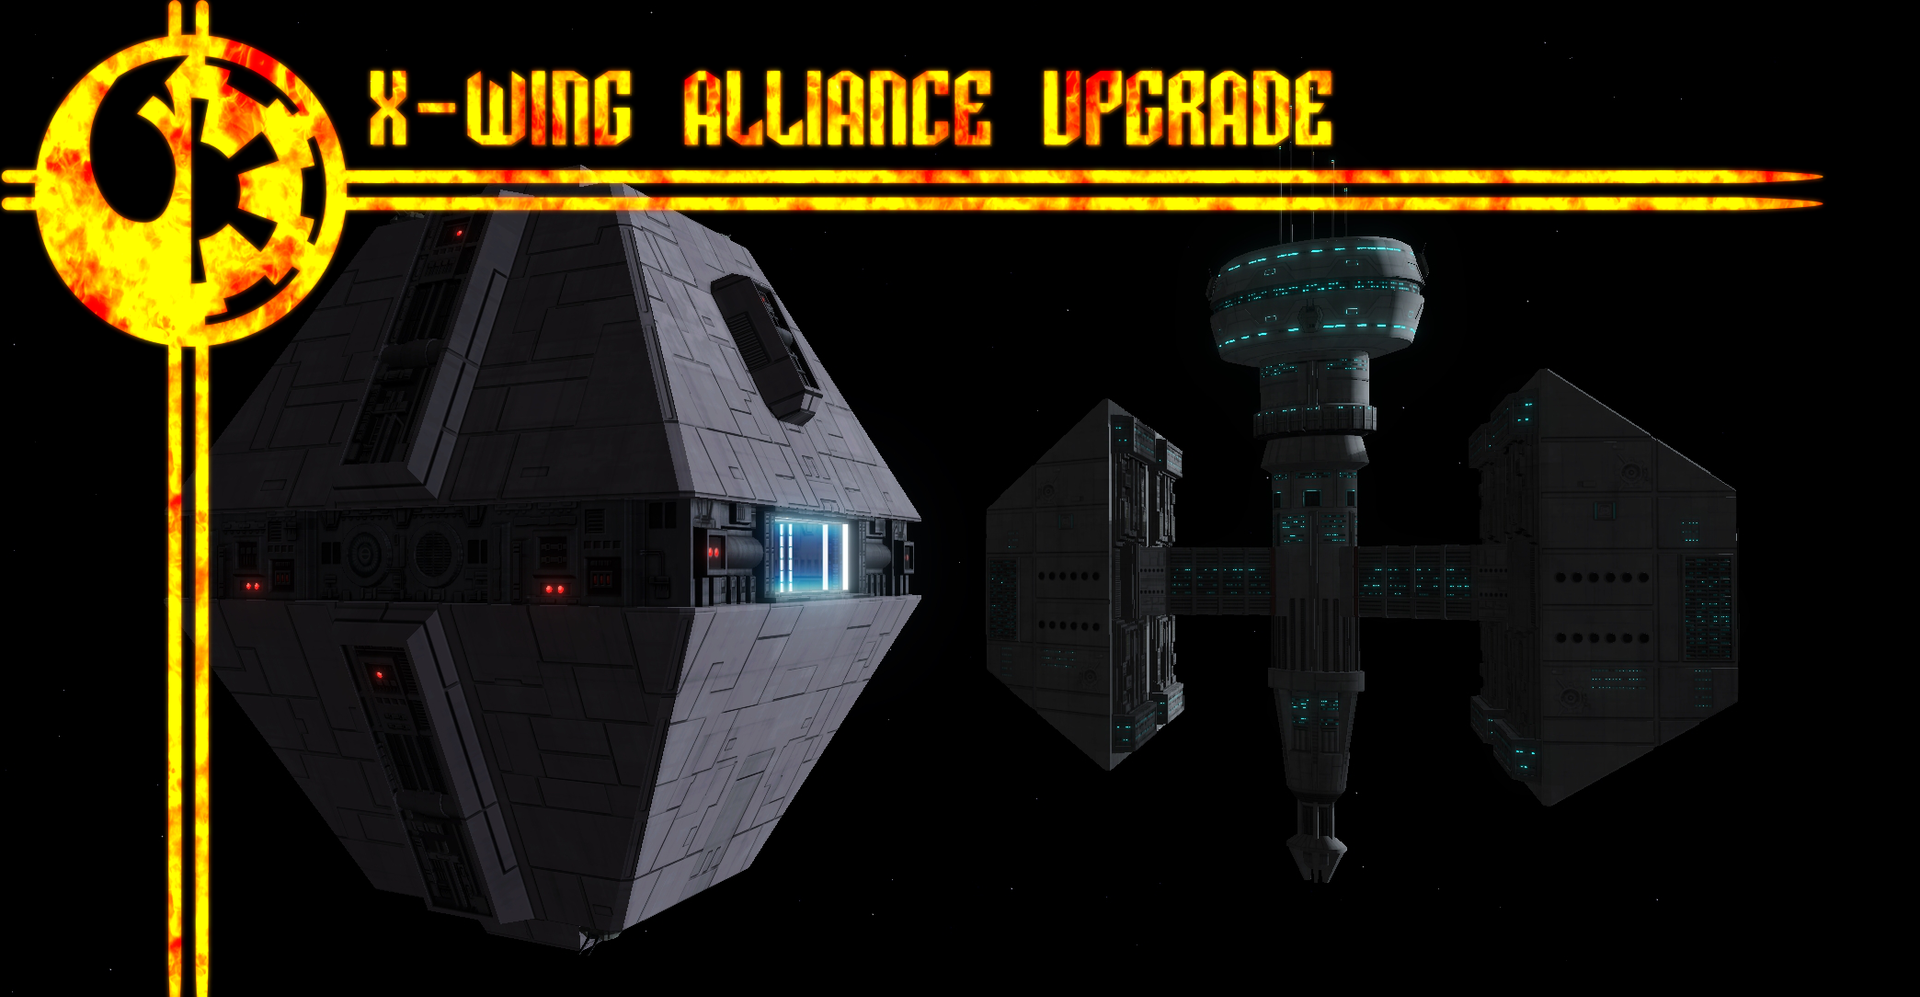 Celebrating the 25th anniversary of X-Wing Alliance